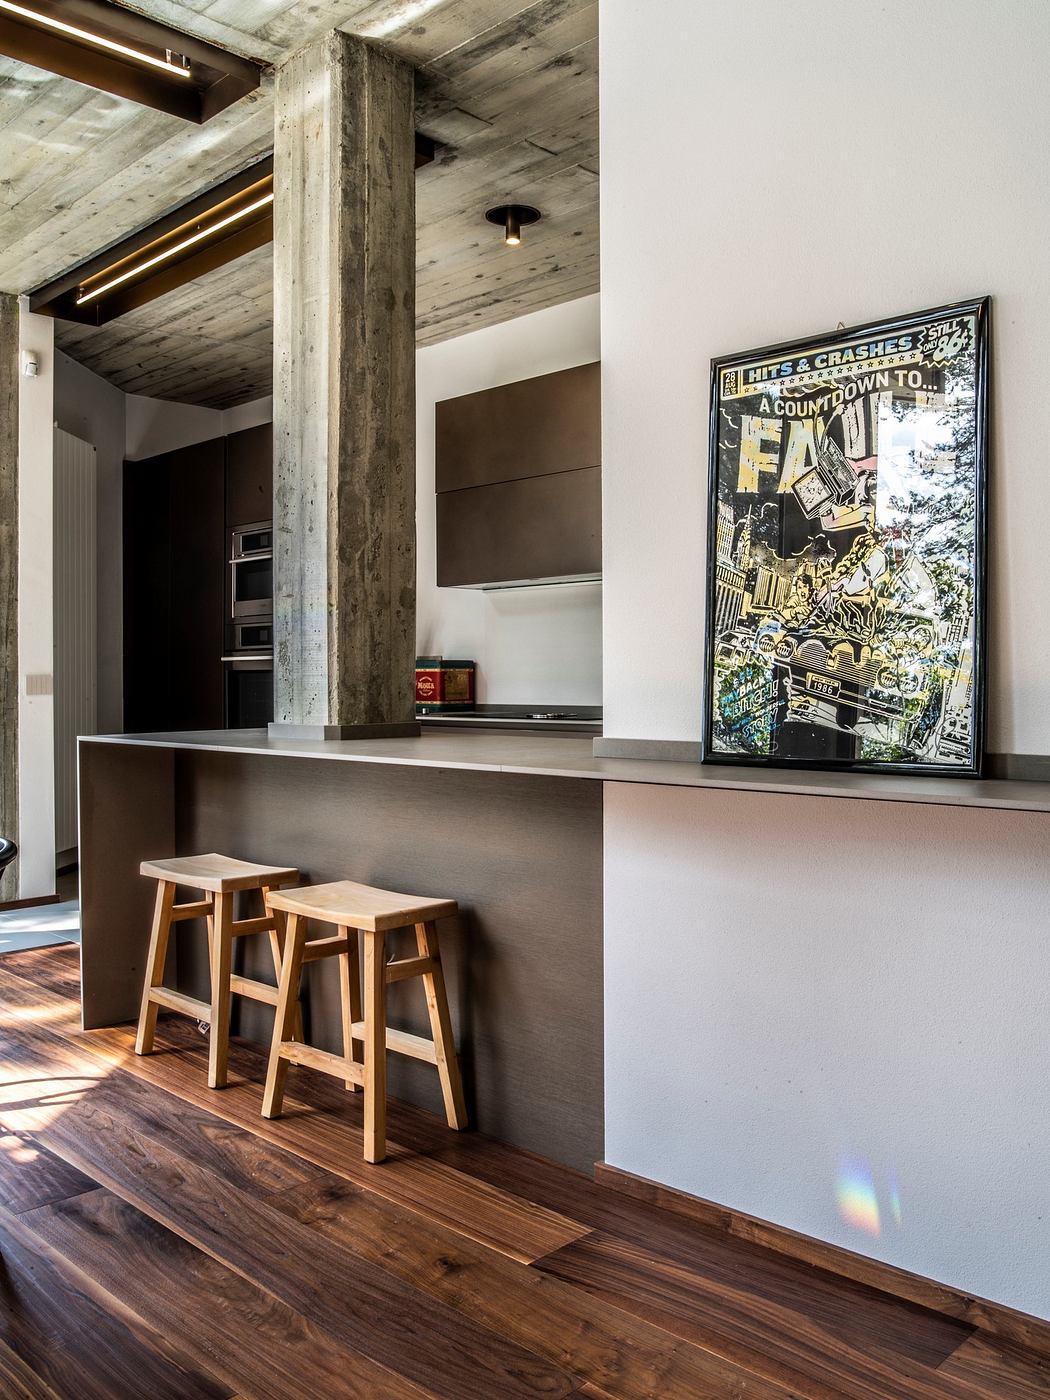 Modern kitchen corner with wooden stools, exposed concrete, and framed artwork.